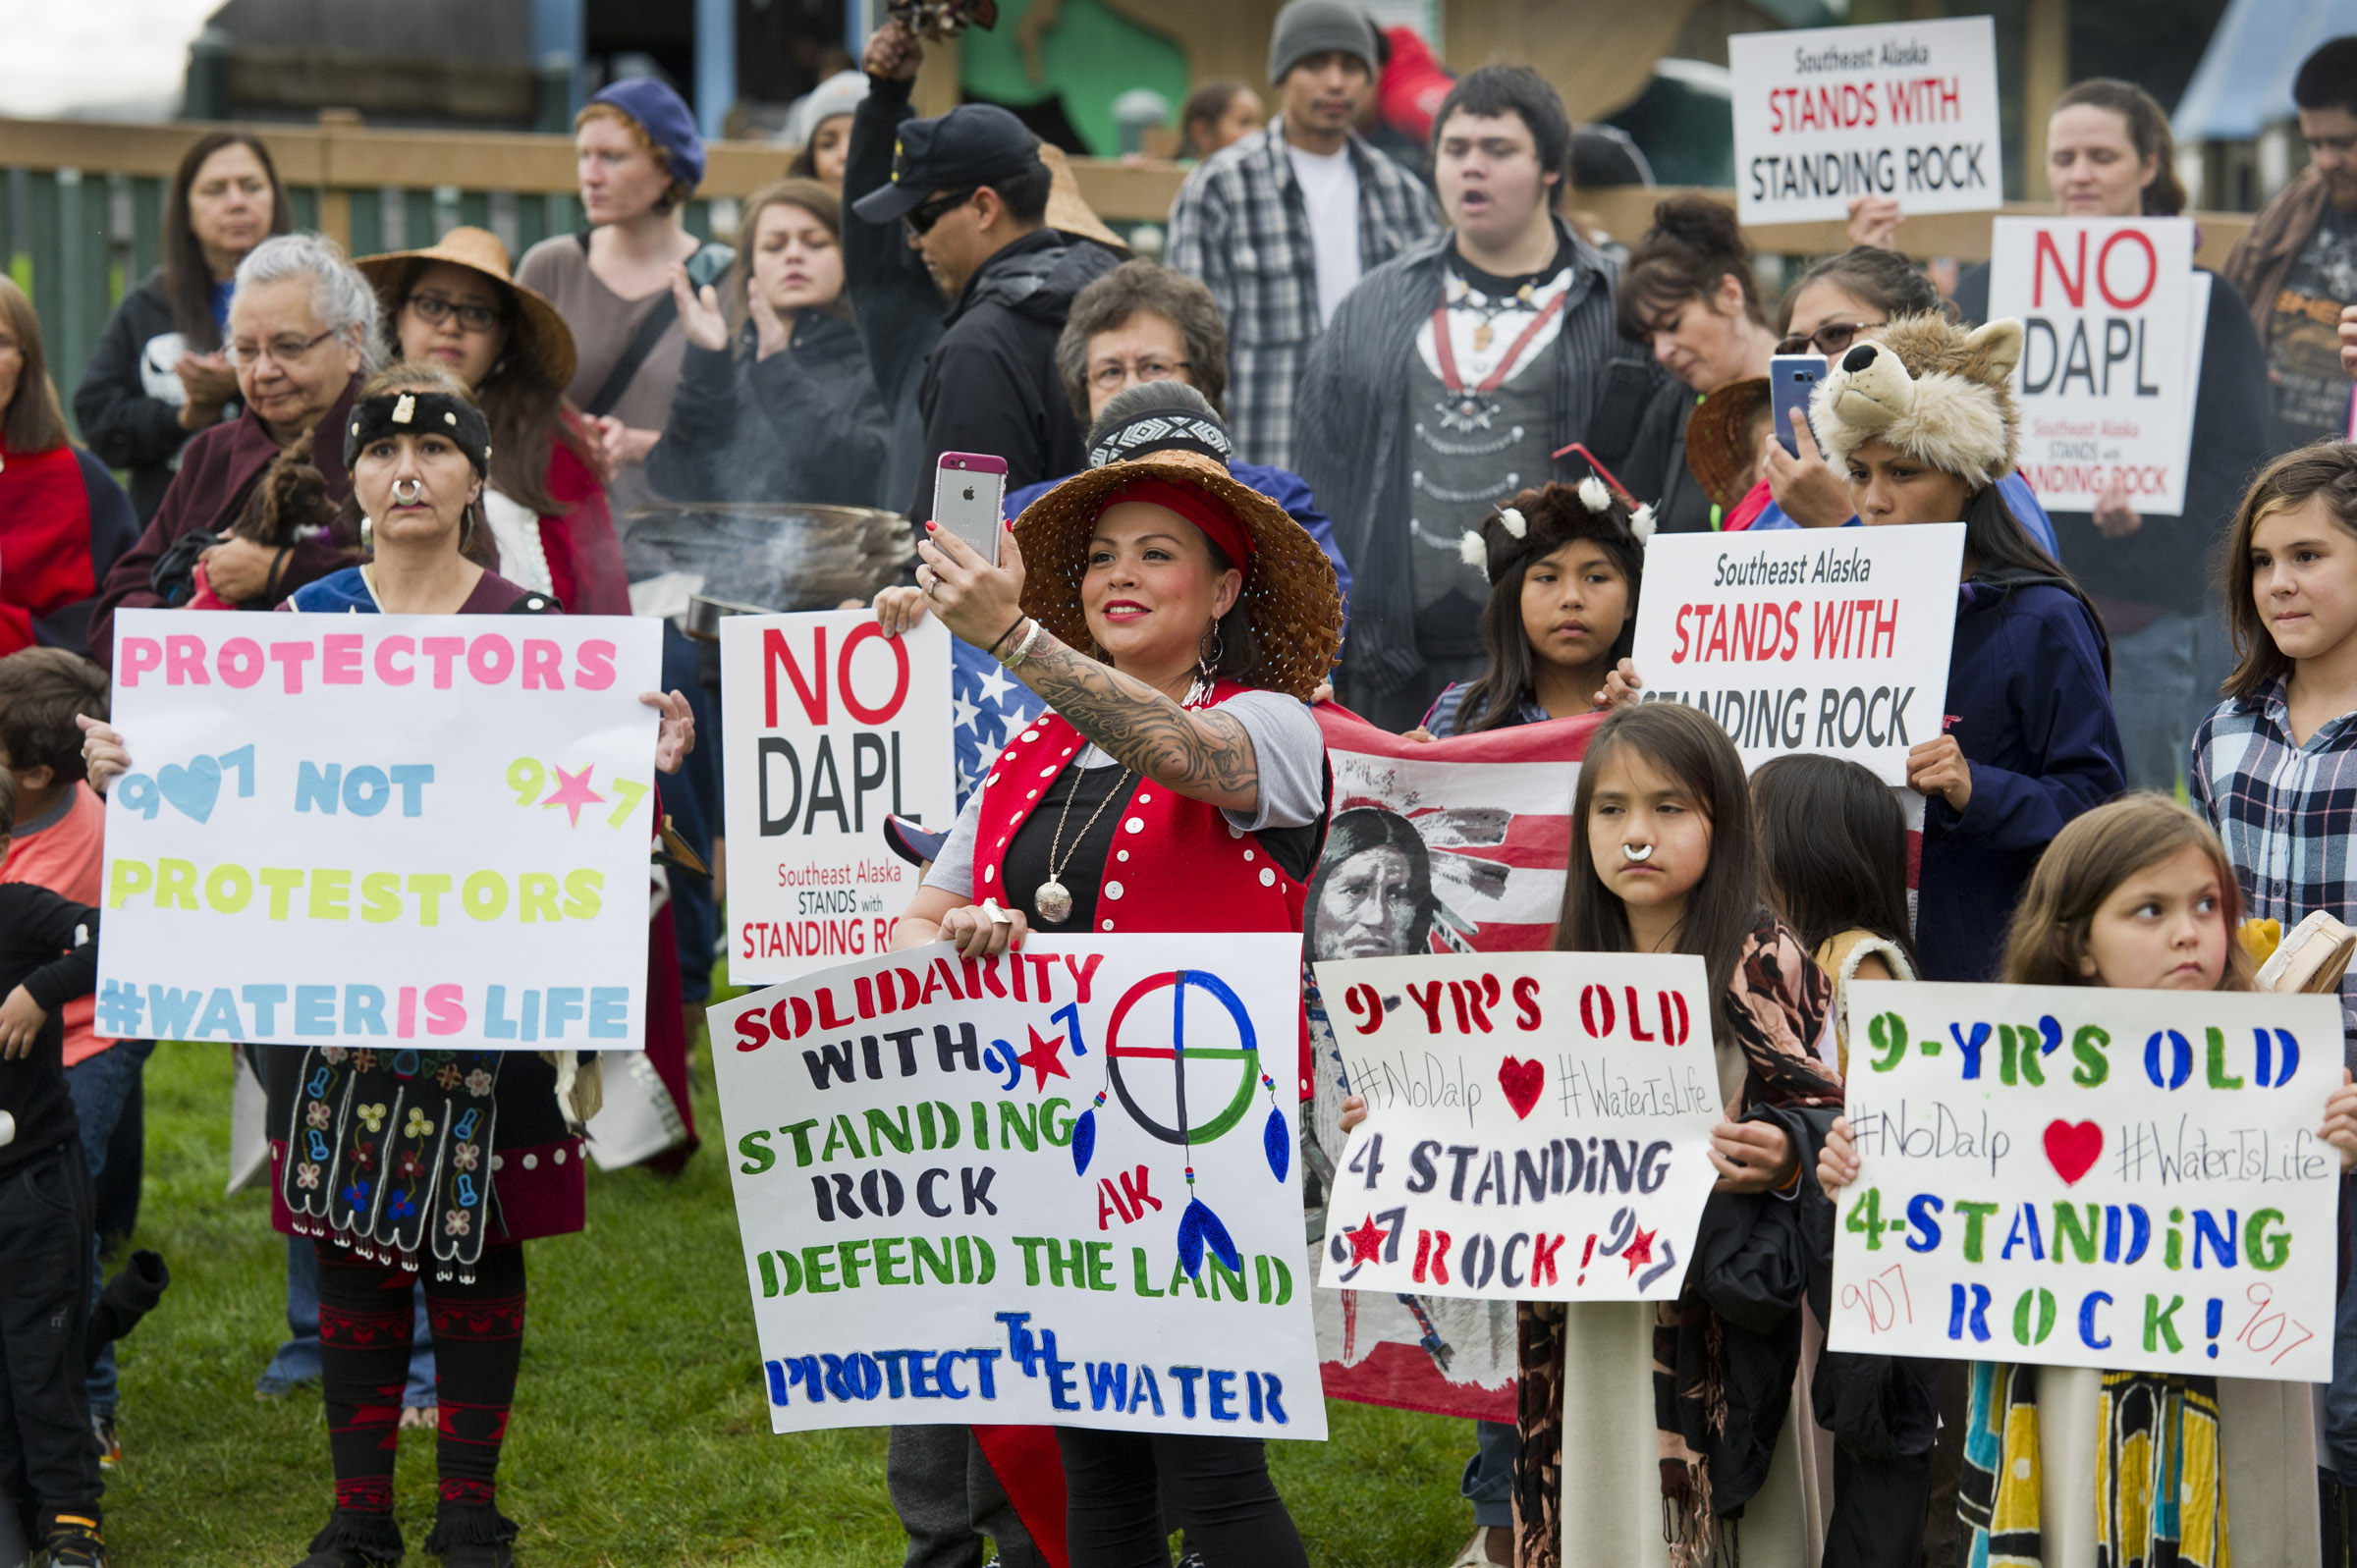 About 100 people attend a rally at Twin Lakes Wednesday evening in solidarity with the Standing Rock Sioux Tribe in North Dakota over the construction of the 1,172-mile Dakota Access pipeline.